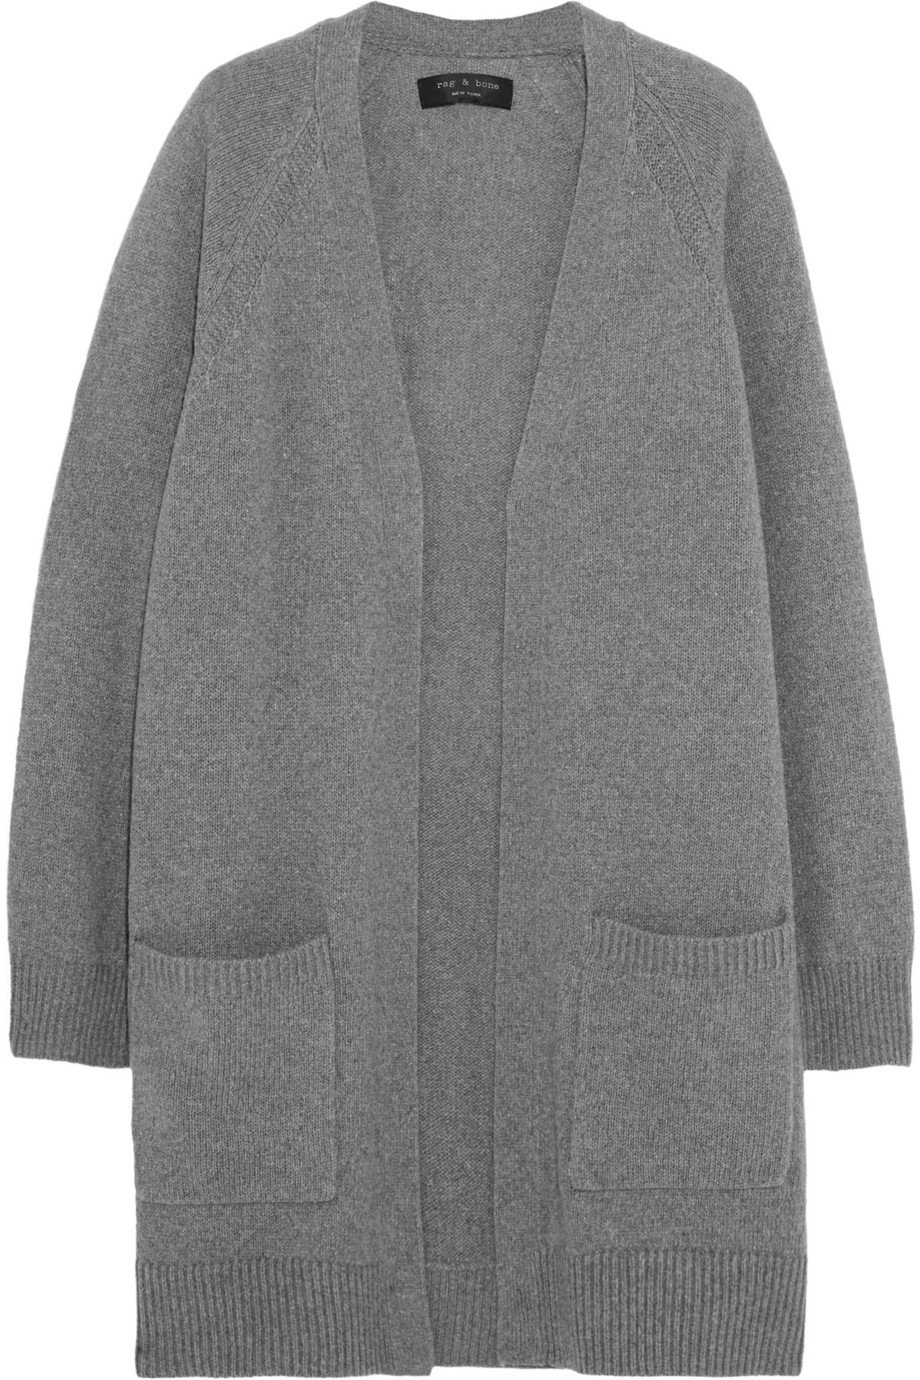 Rag & bone Charlize Cashmere and Wool-blend Cardigan in Gray | Lyst